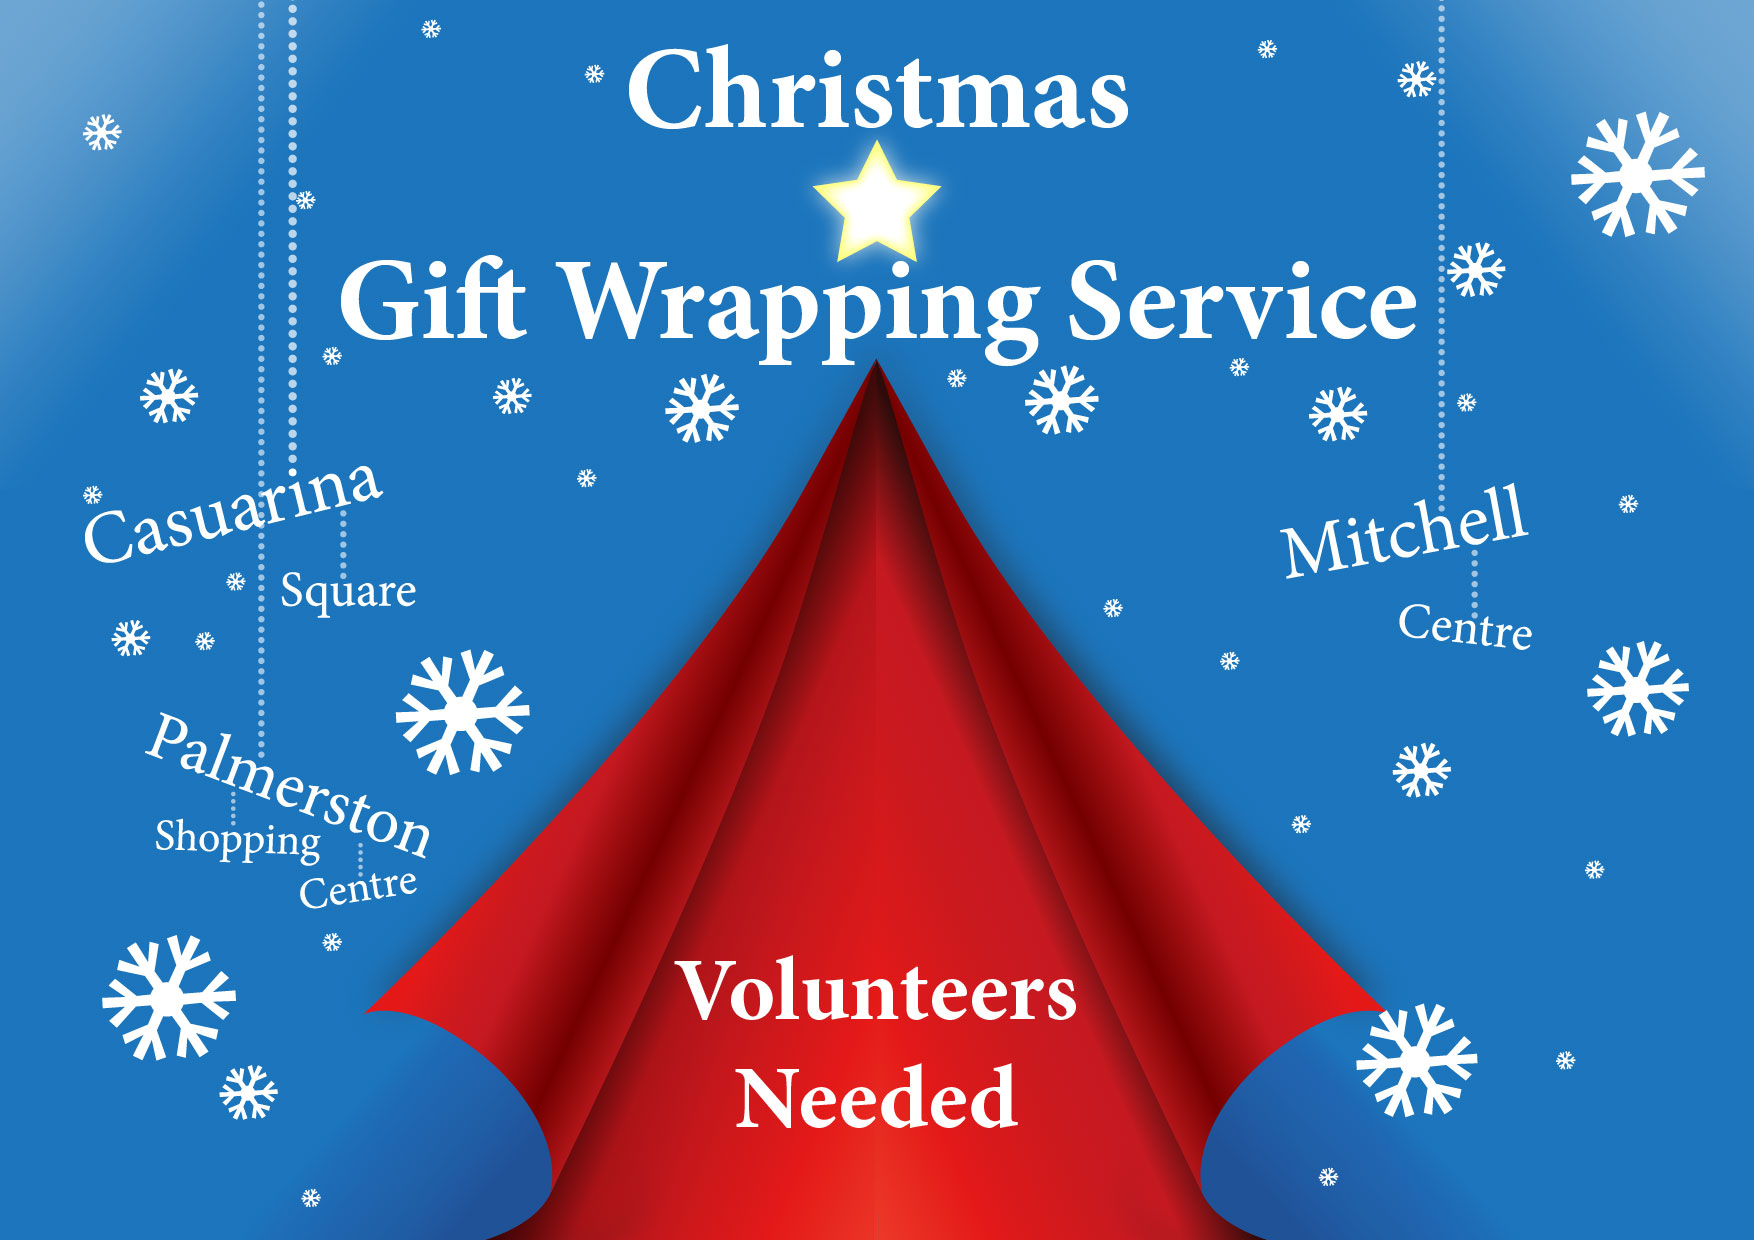 Somerville gift wrapping services offered at Casuarina Square, Palmerston Shopping Centre and Mitchell Centre. Volunteers welcomed.